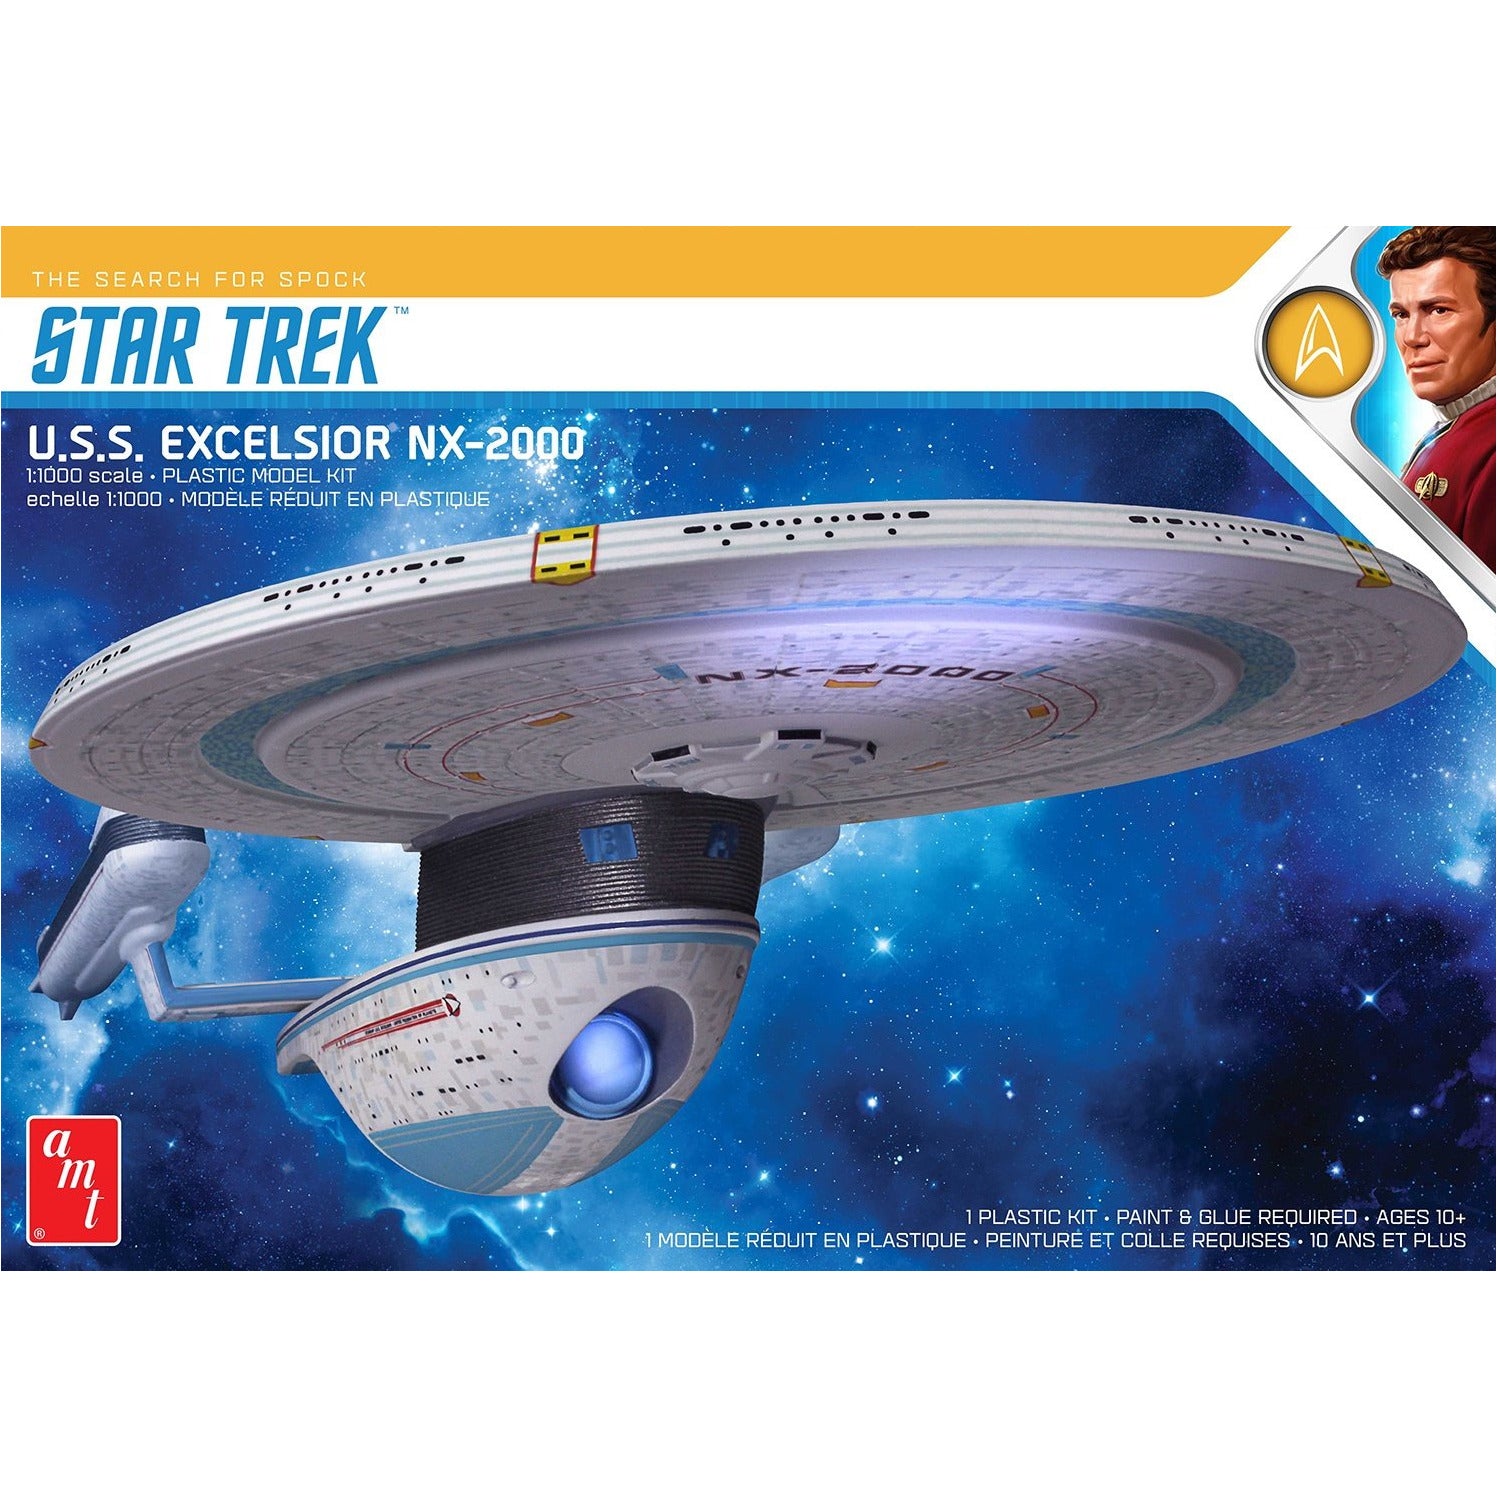 USS NX-2000 Excelsior 1/1000 Star Trek The Search for Spock Model Kit #1257 by AMT